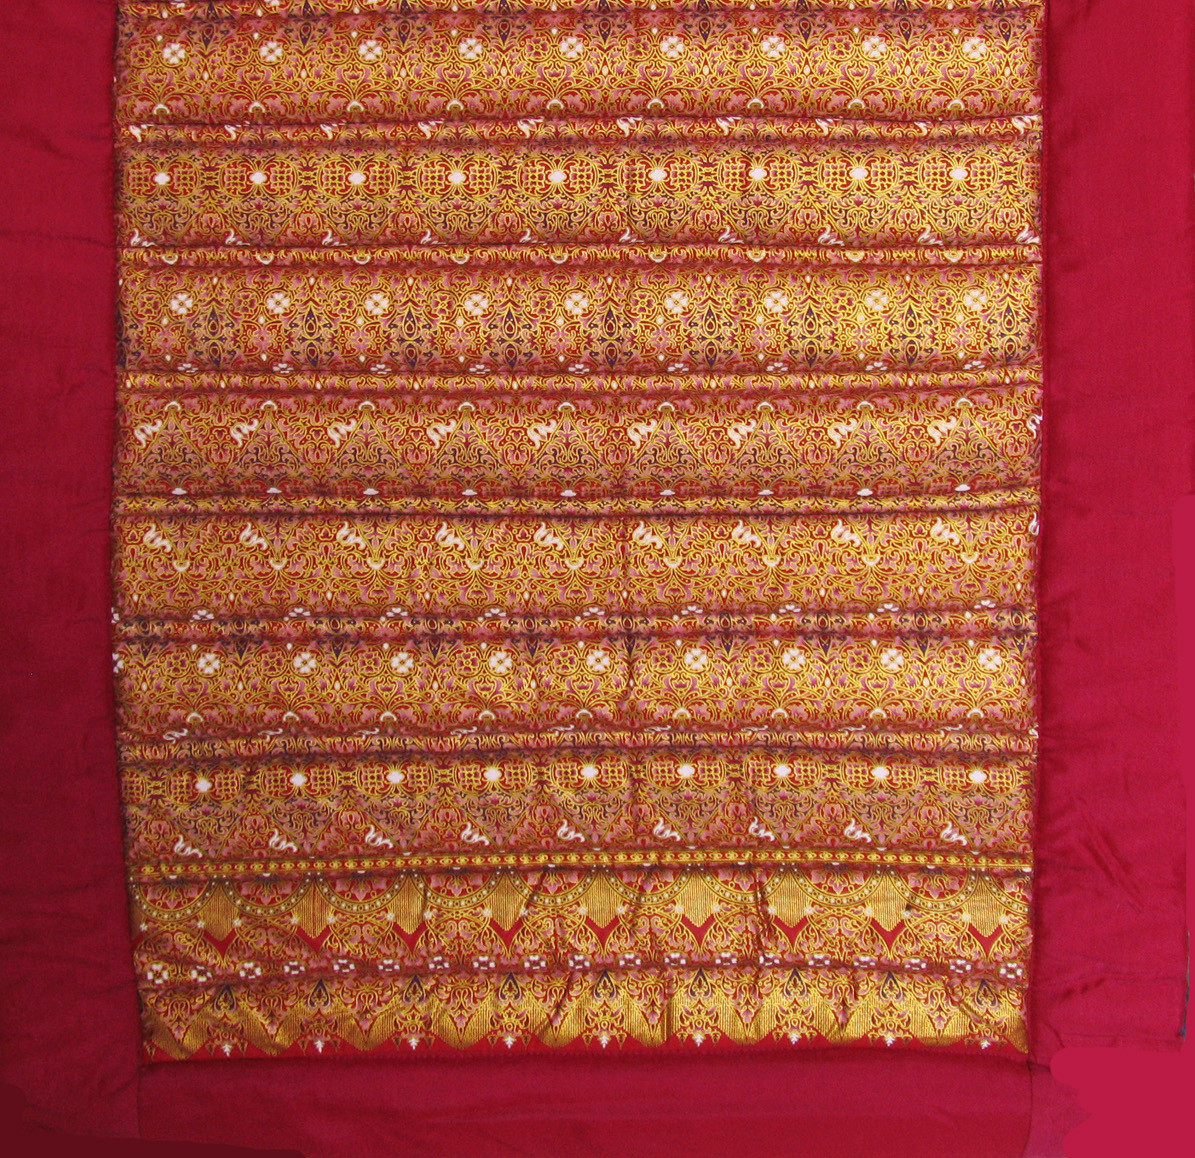 Yoga Mat or Meditation Mat - Quilted Roll-Up Cotton - Pomegranate/Gold  70x24 - Boon Decor